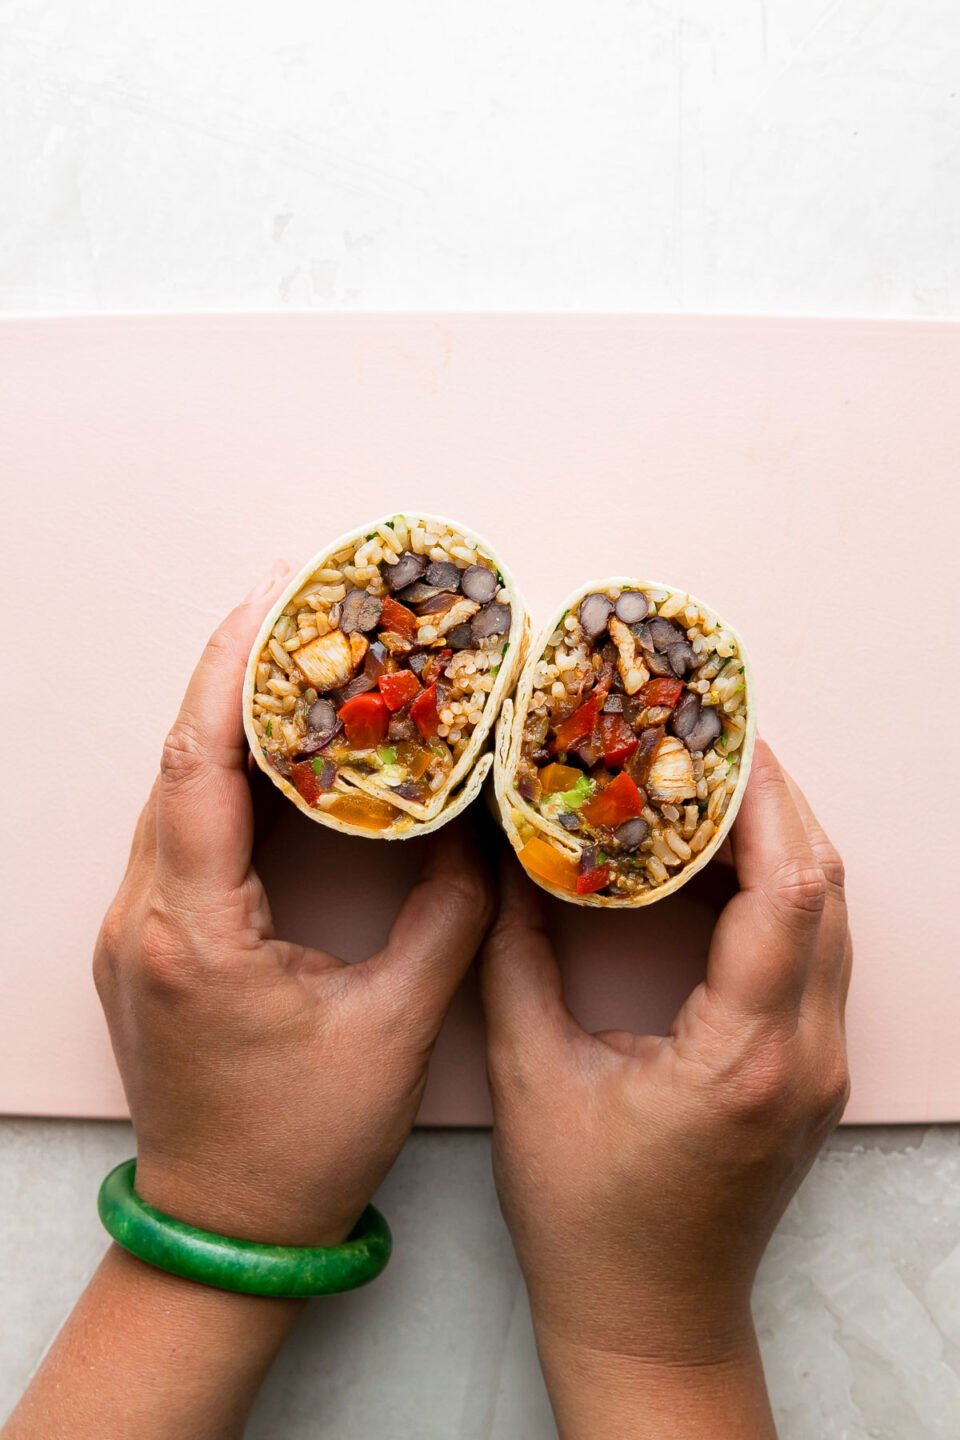 A woman's hands hold a finished chicken fajita burrito that has been cut in half. The burrito halves rest atop a pink plastic cutting board with the filling sit facing up to reveal what is inside. The cutting board sits atop a creamy white textured surface.